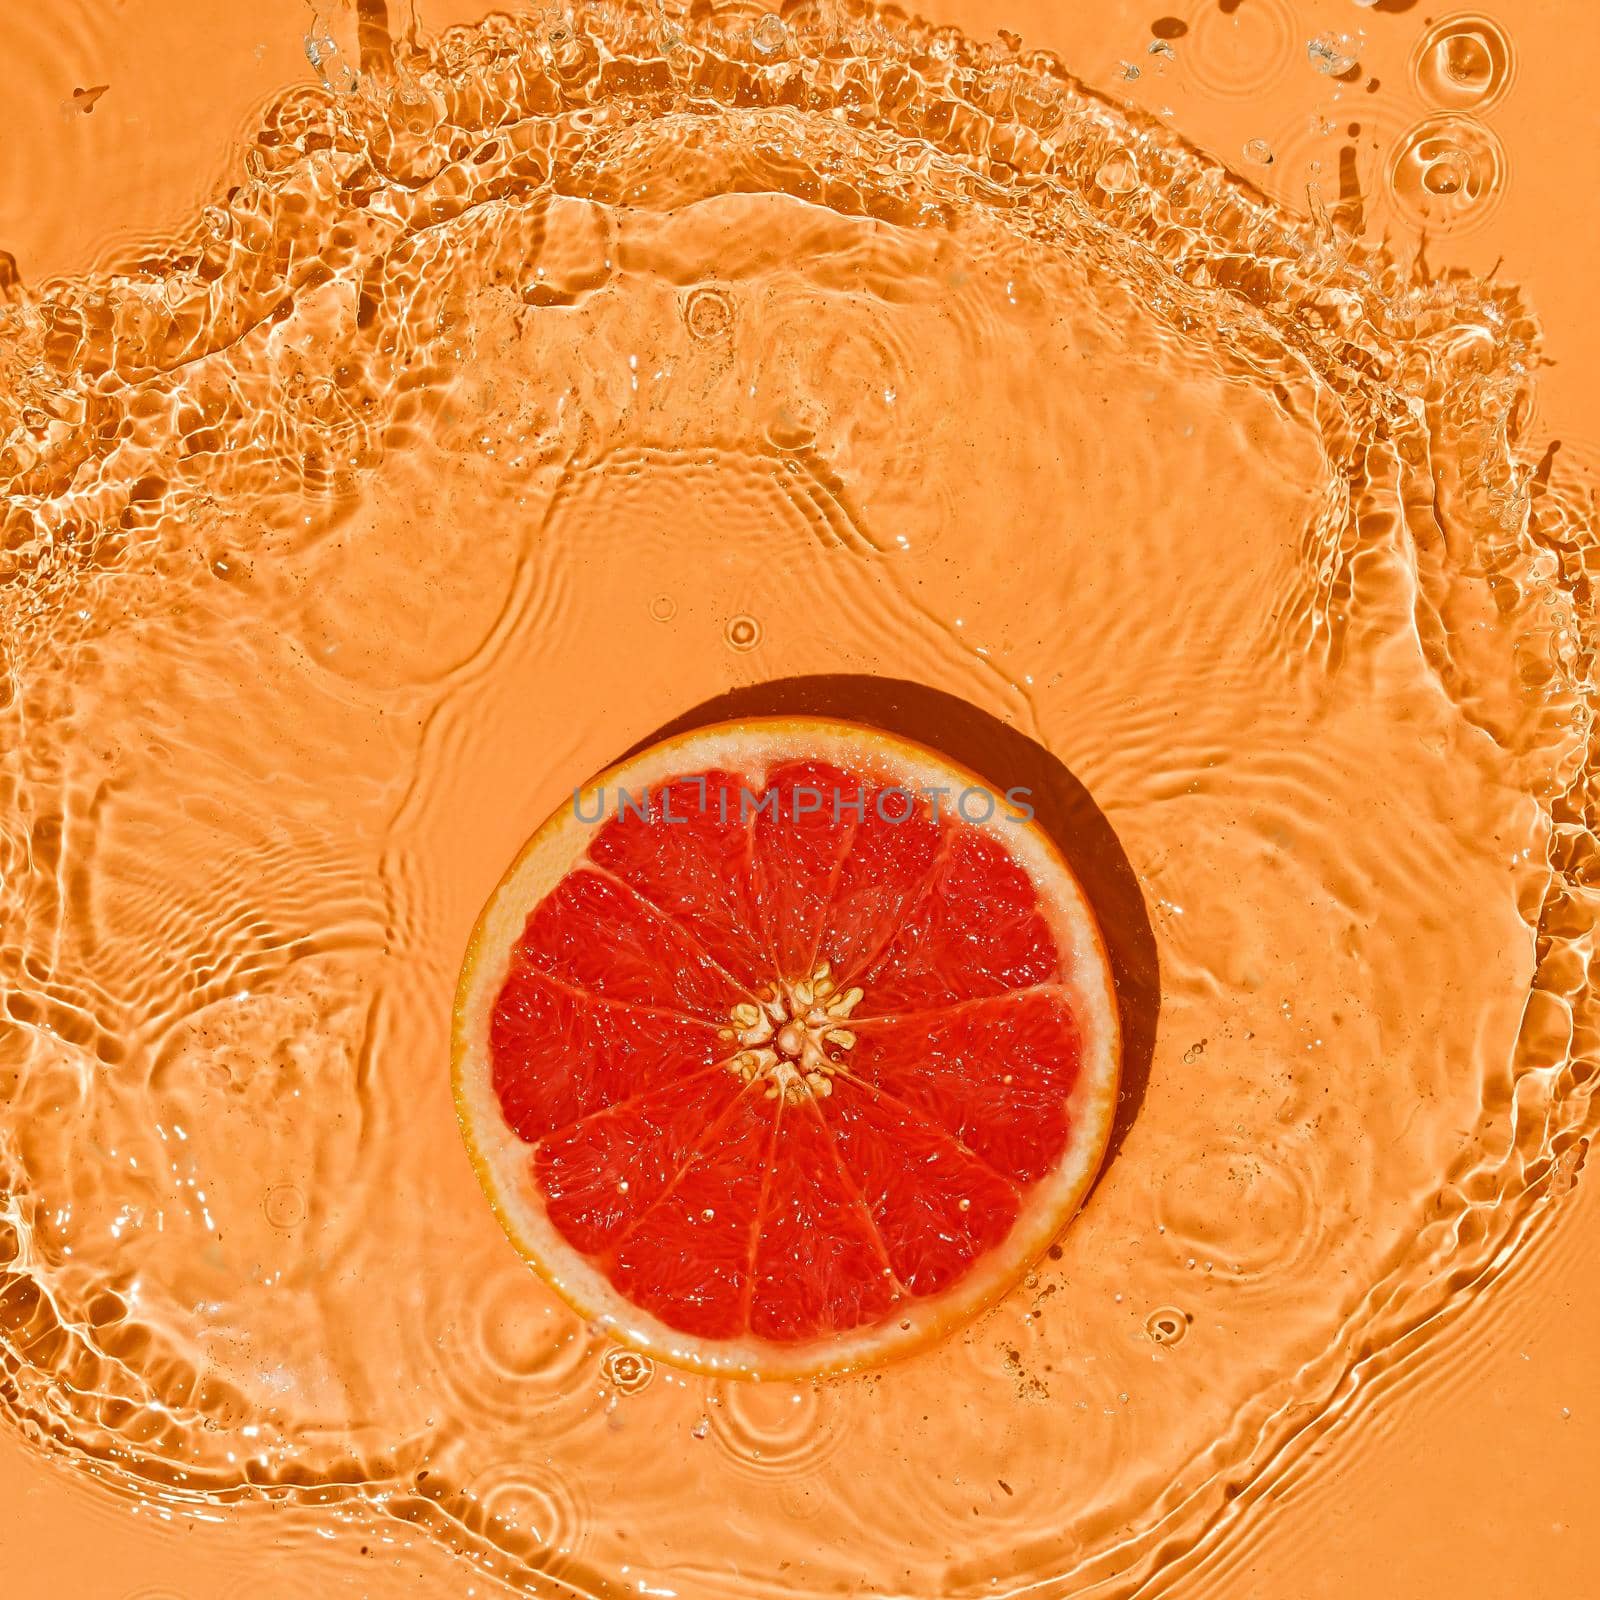 Summer fruit concept citrus red grapefruit on a bright orange background with splashes of water movement.